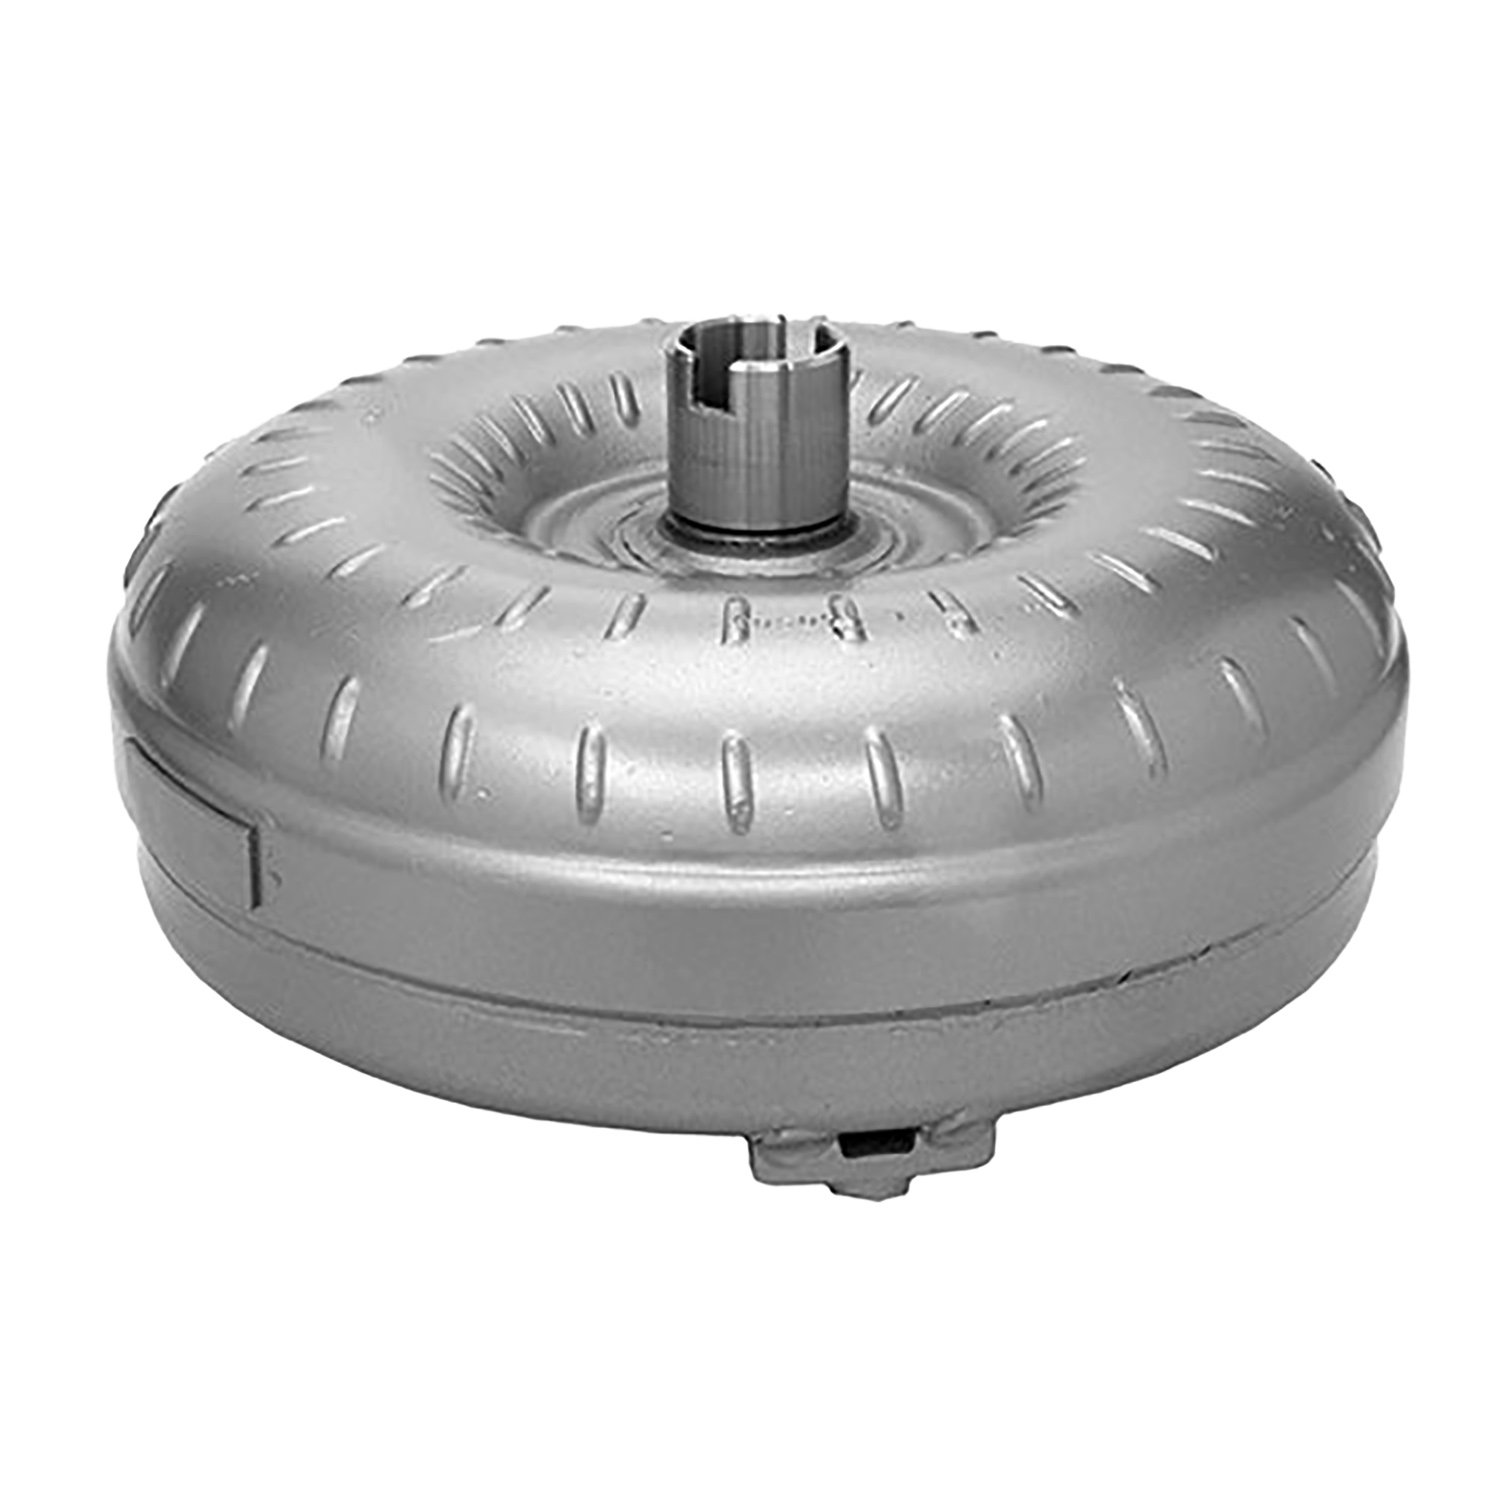 Remanufactured Automatic Transmission Torque Converter for GM TH700R4/4L60 No Cltch FB